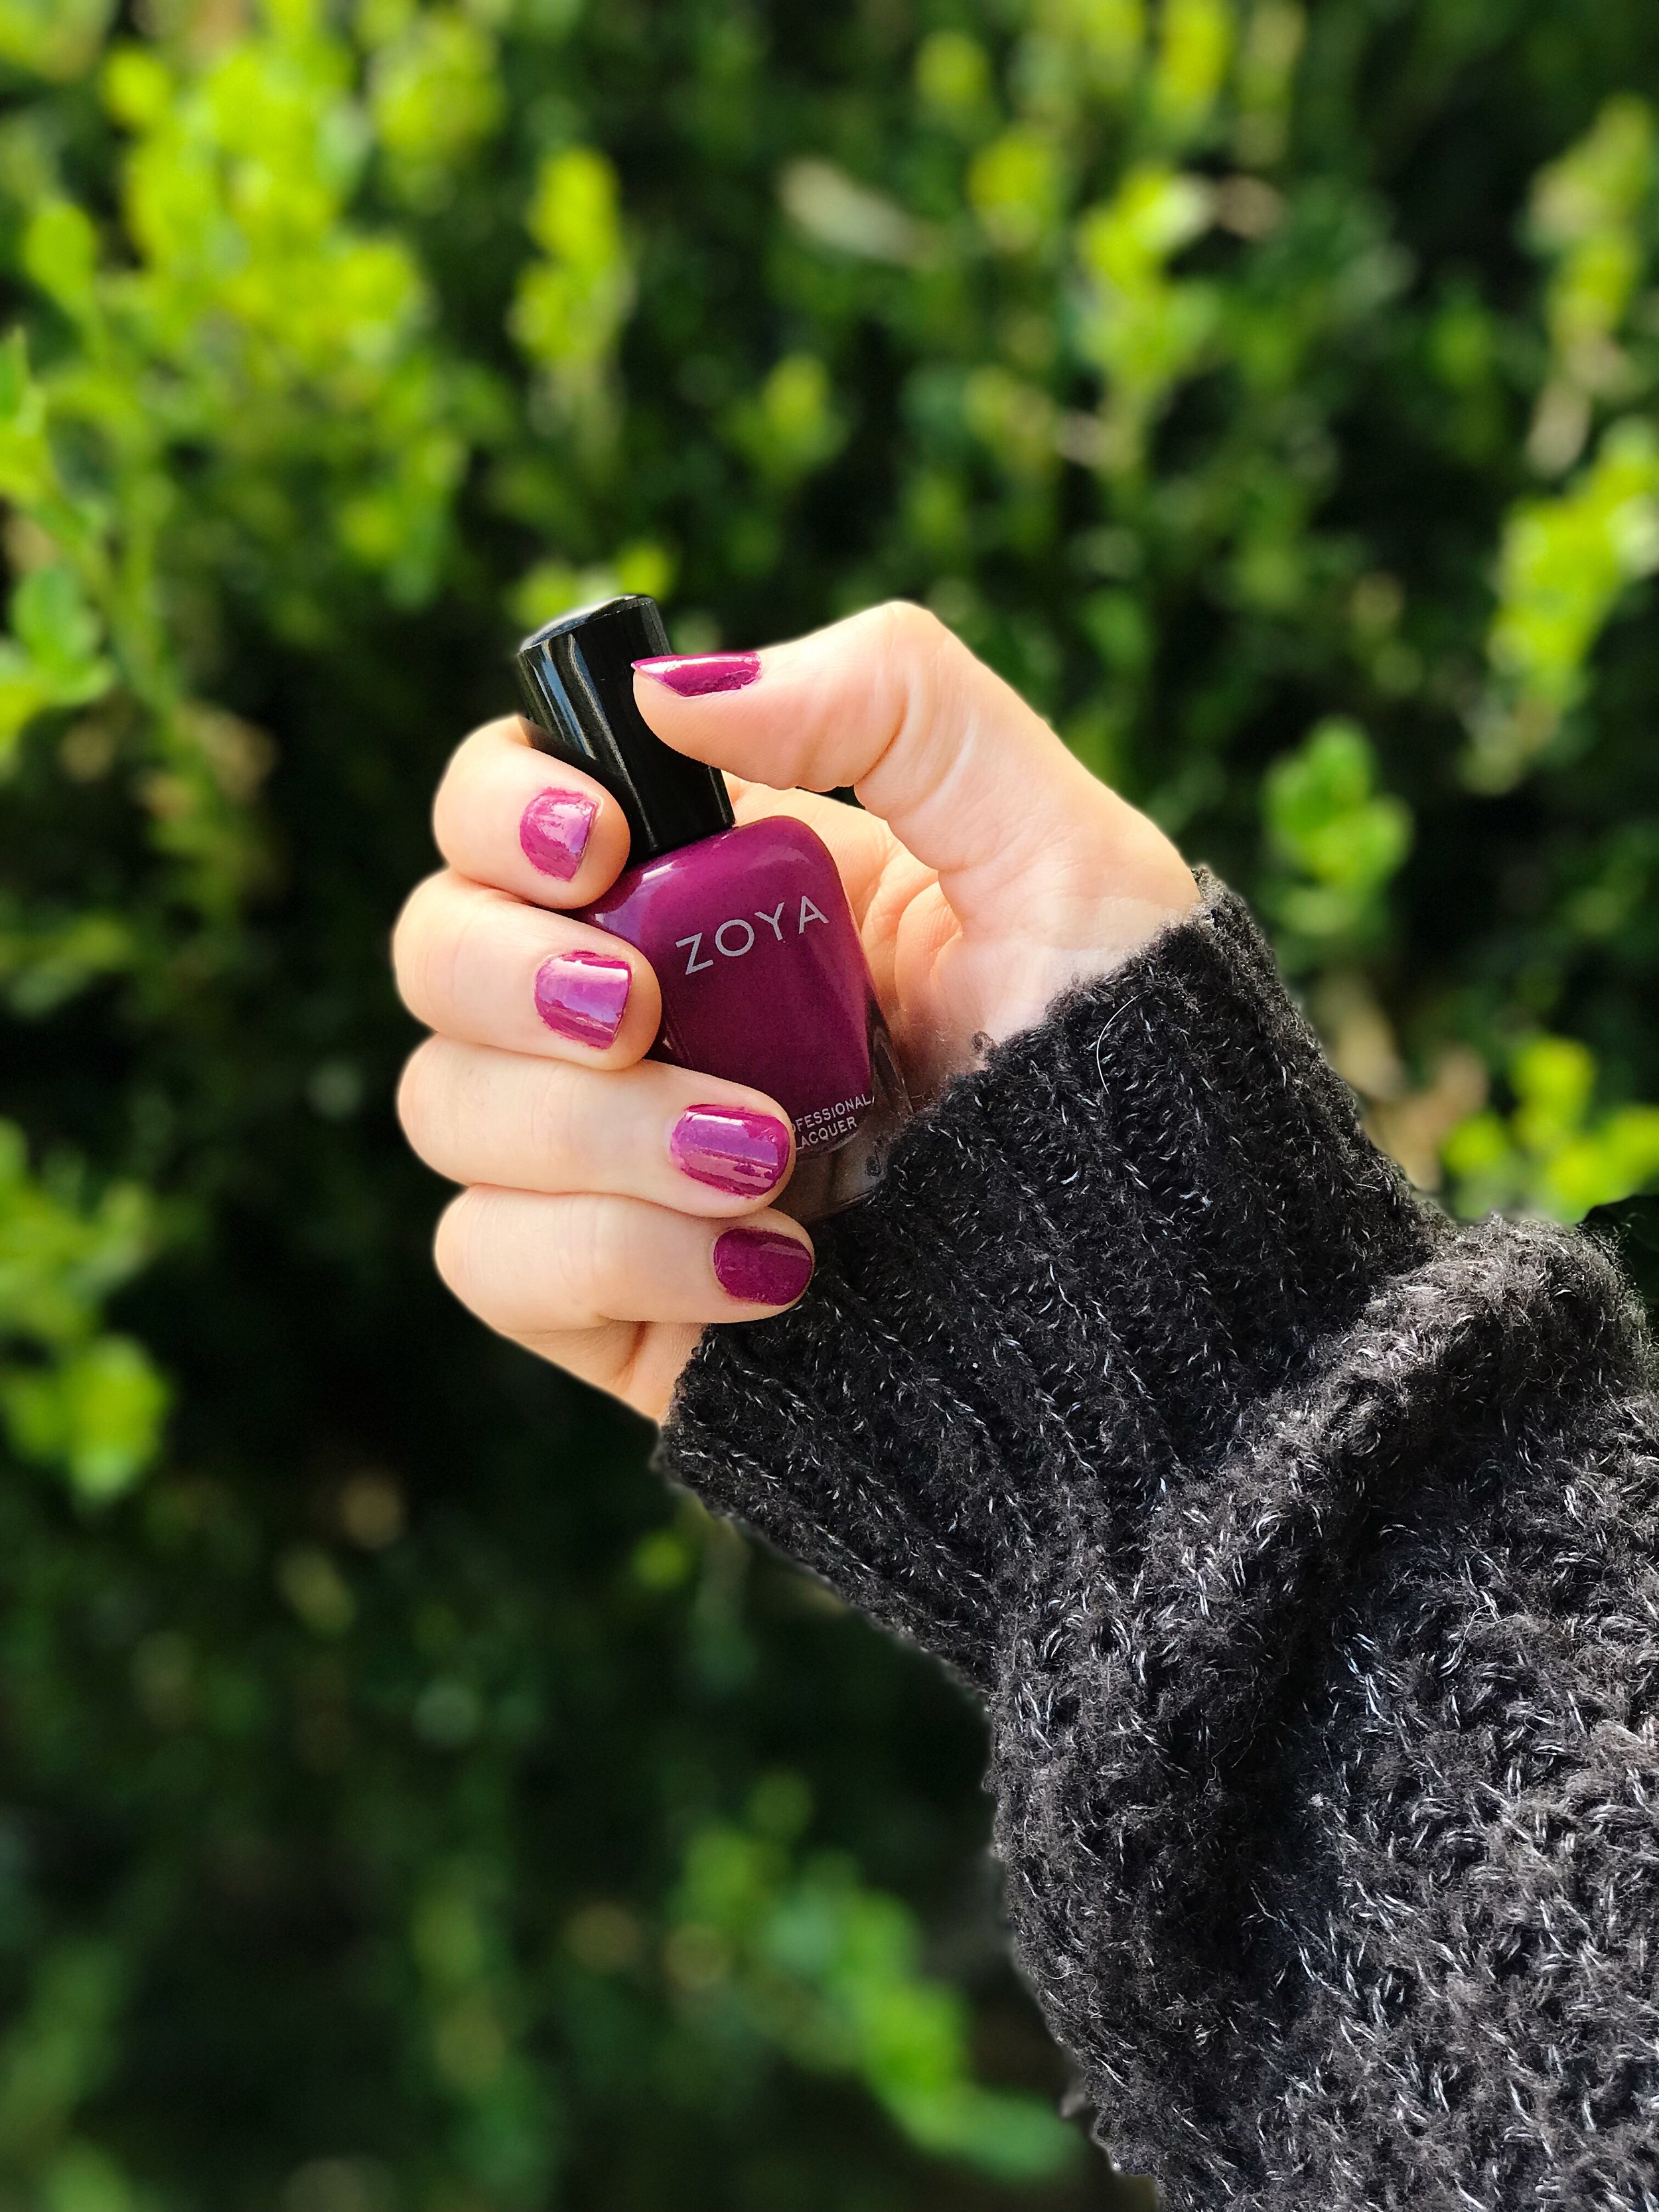 Top 10 Favorite Fall Nail Polishes from Zoya 10 Free. — MALLORIE OWENS